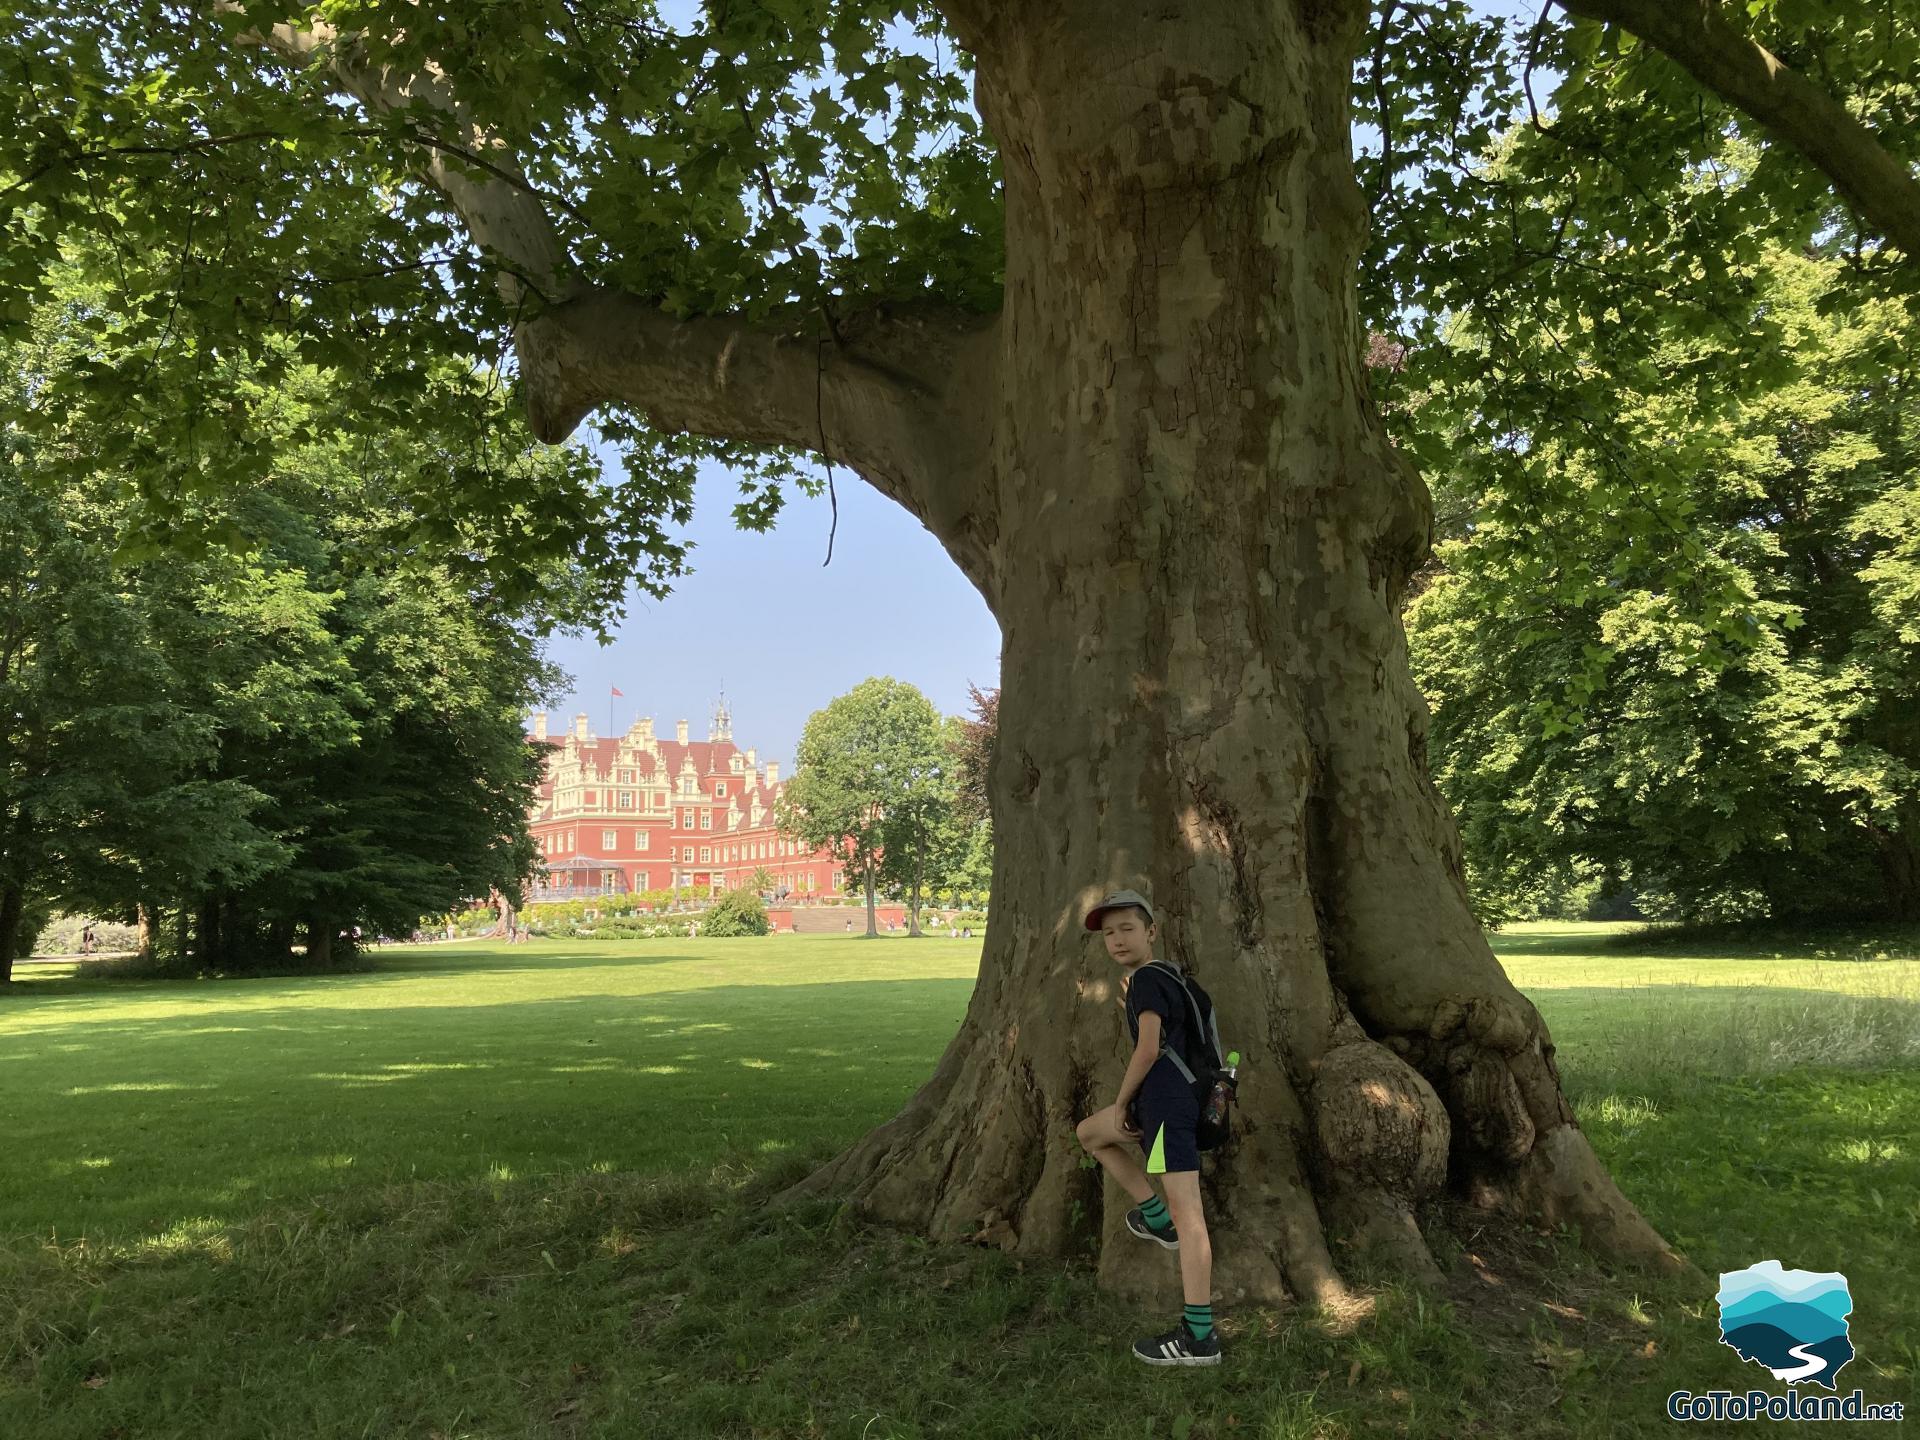 a boy is leaning against a tree trunk, a castle in the background